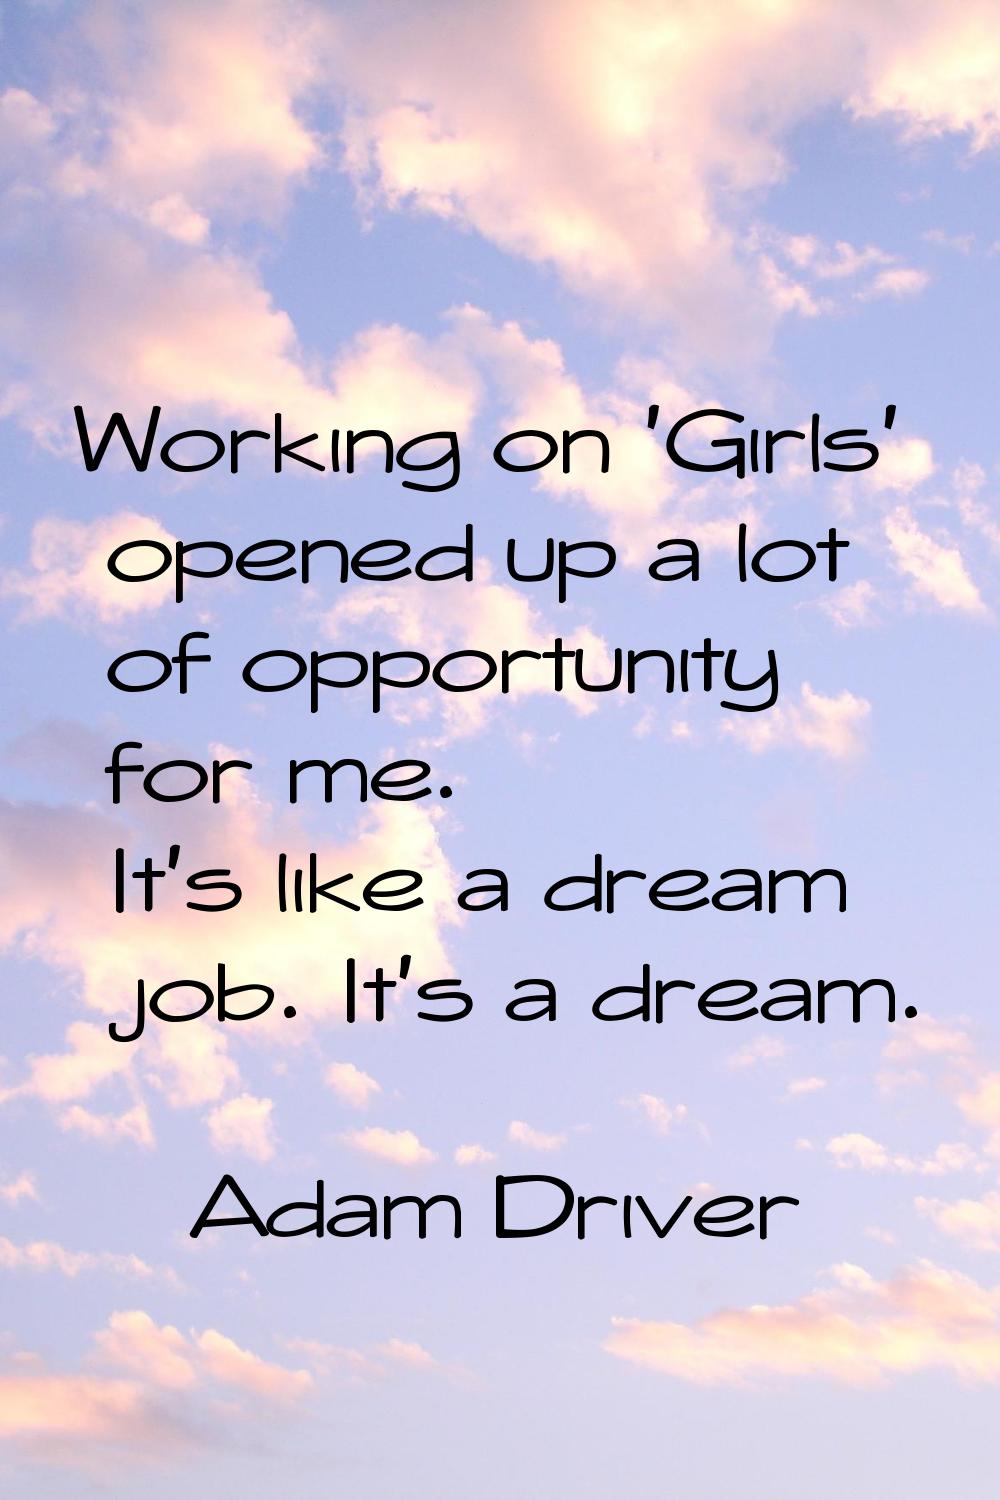 Working on 'Girls' opened up a lot of opportunity for me. It's like a dream job. It's a dream.